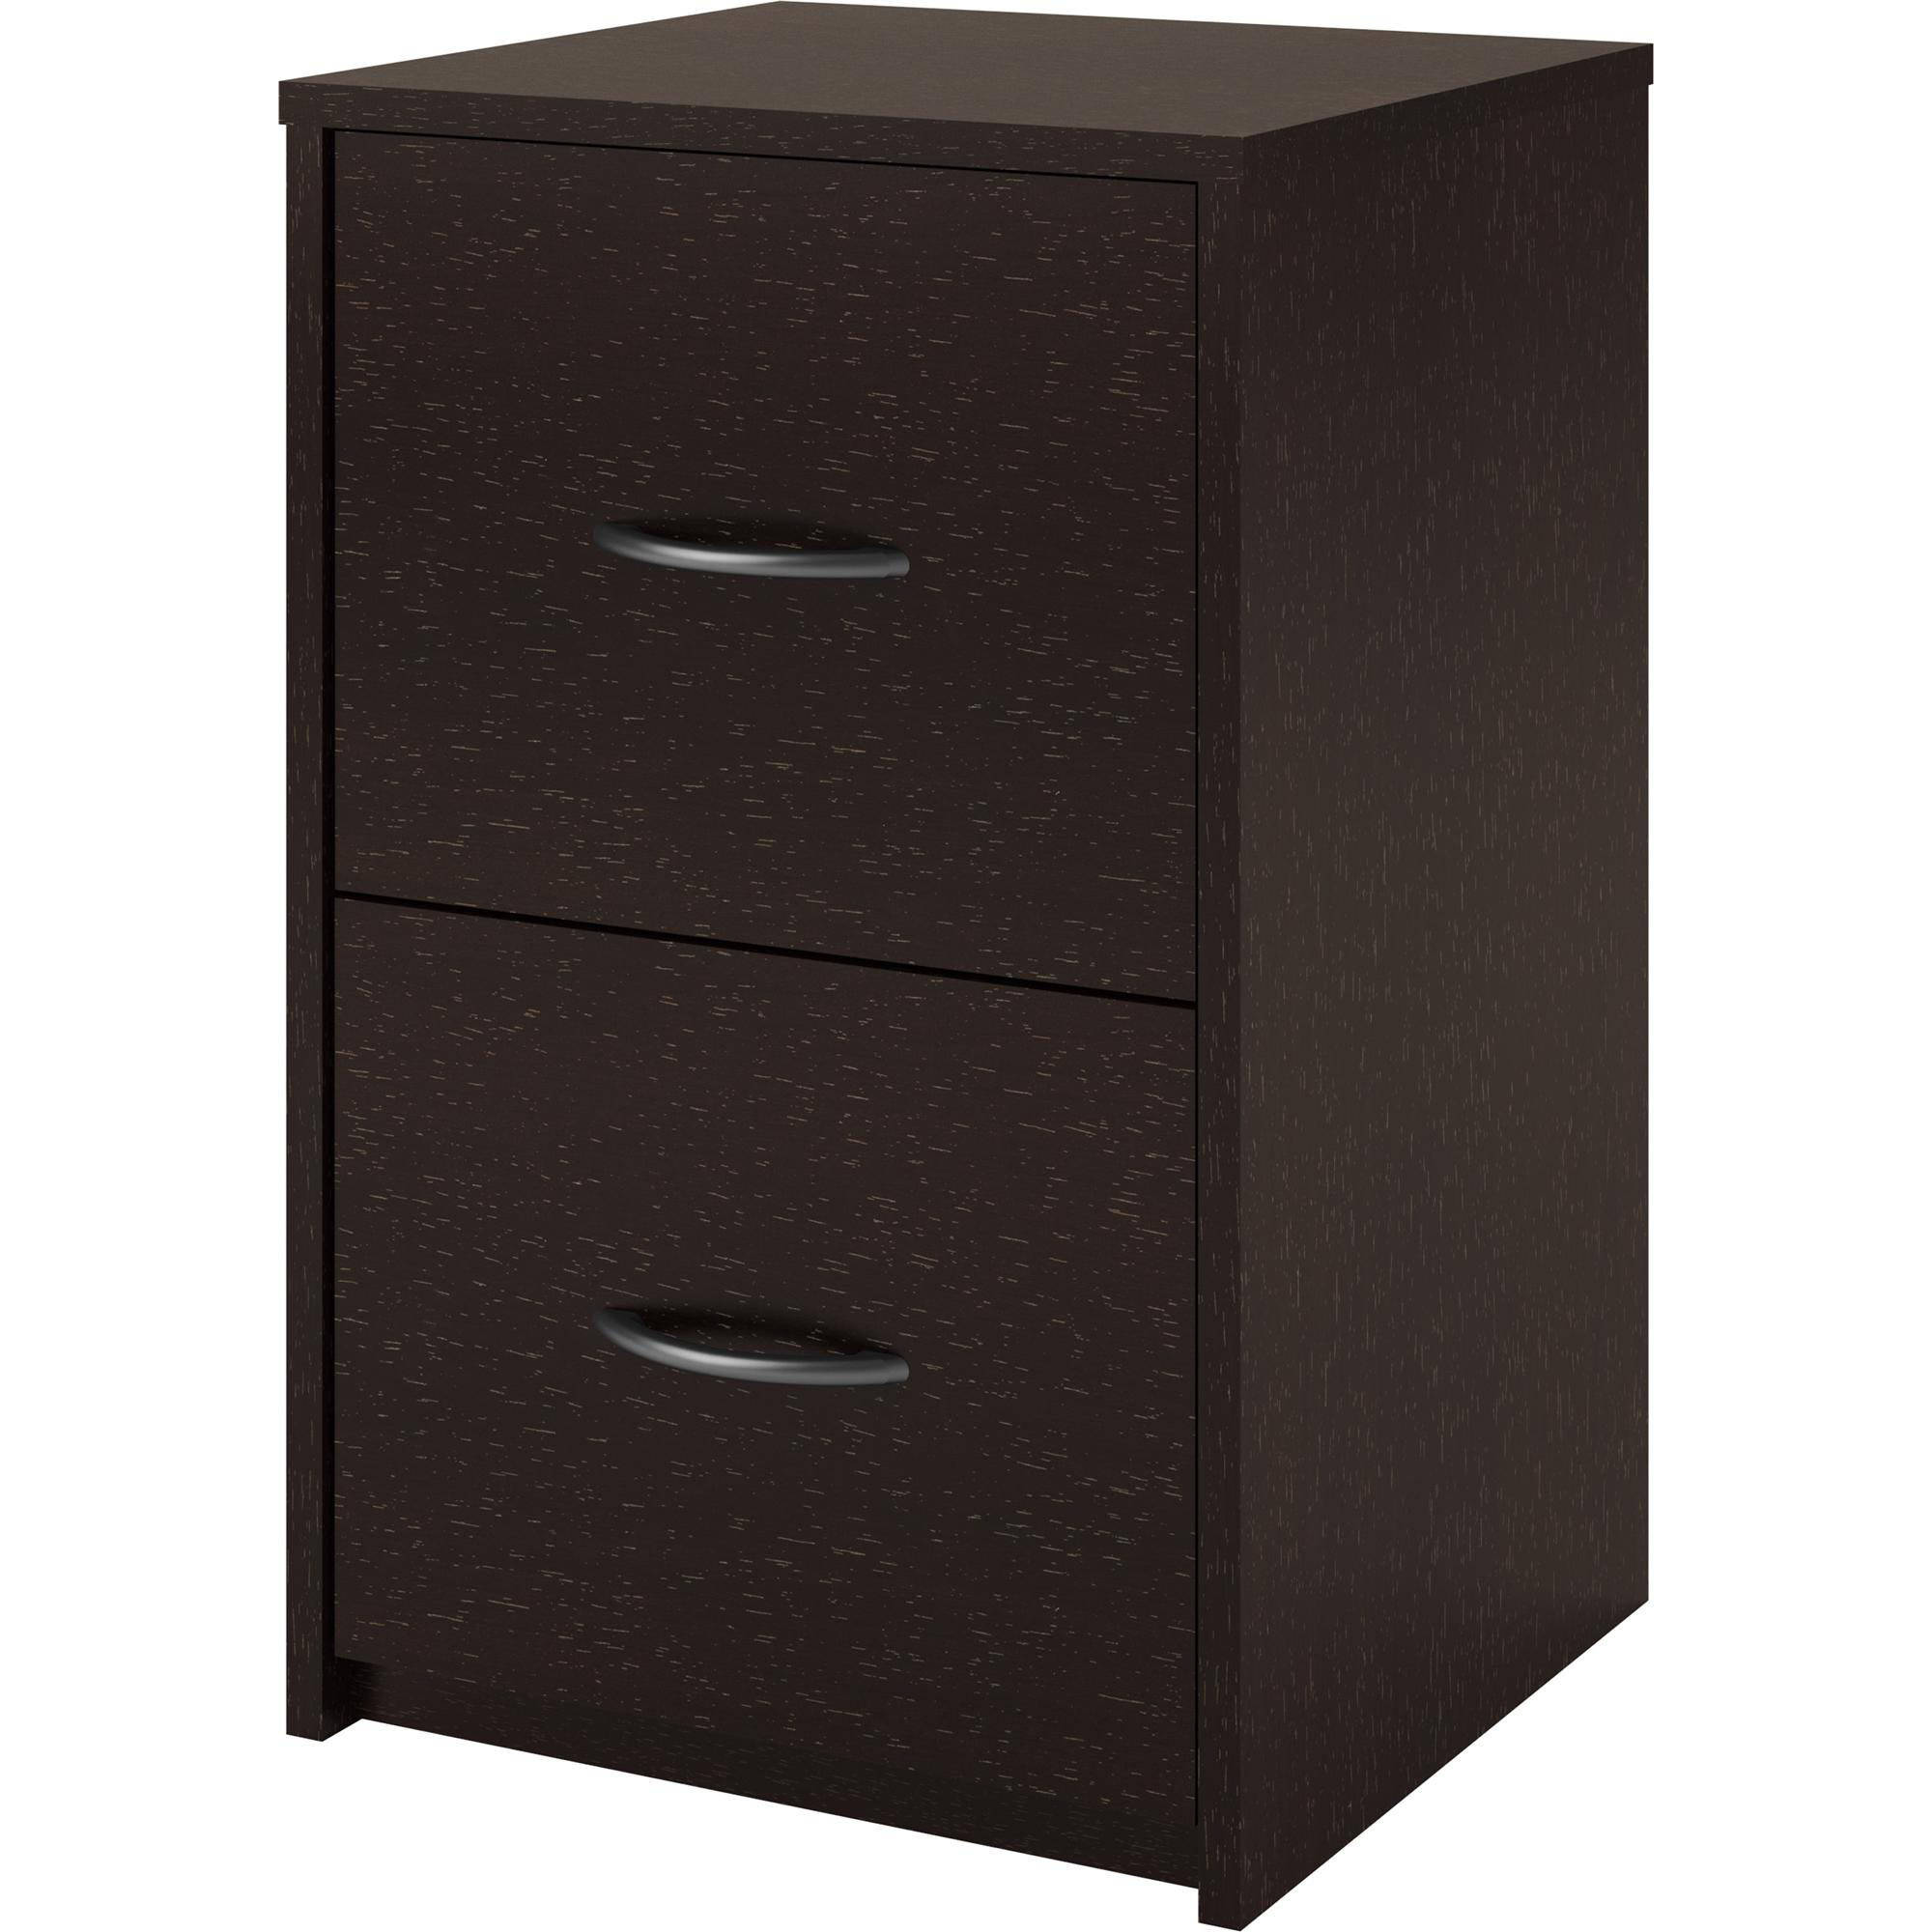 Ameriwood Home Core 2 Drawer File Cabinet, Espresso - image 3 of 5